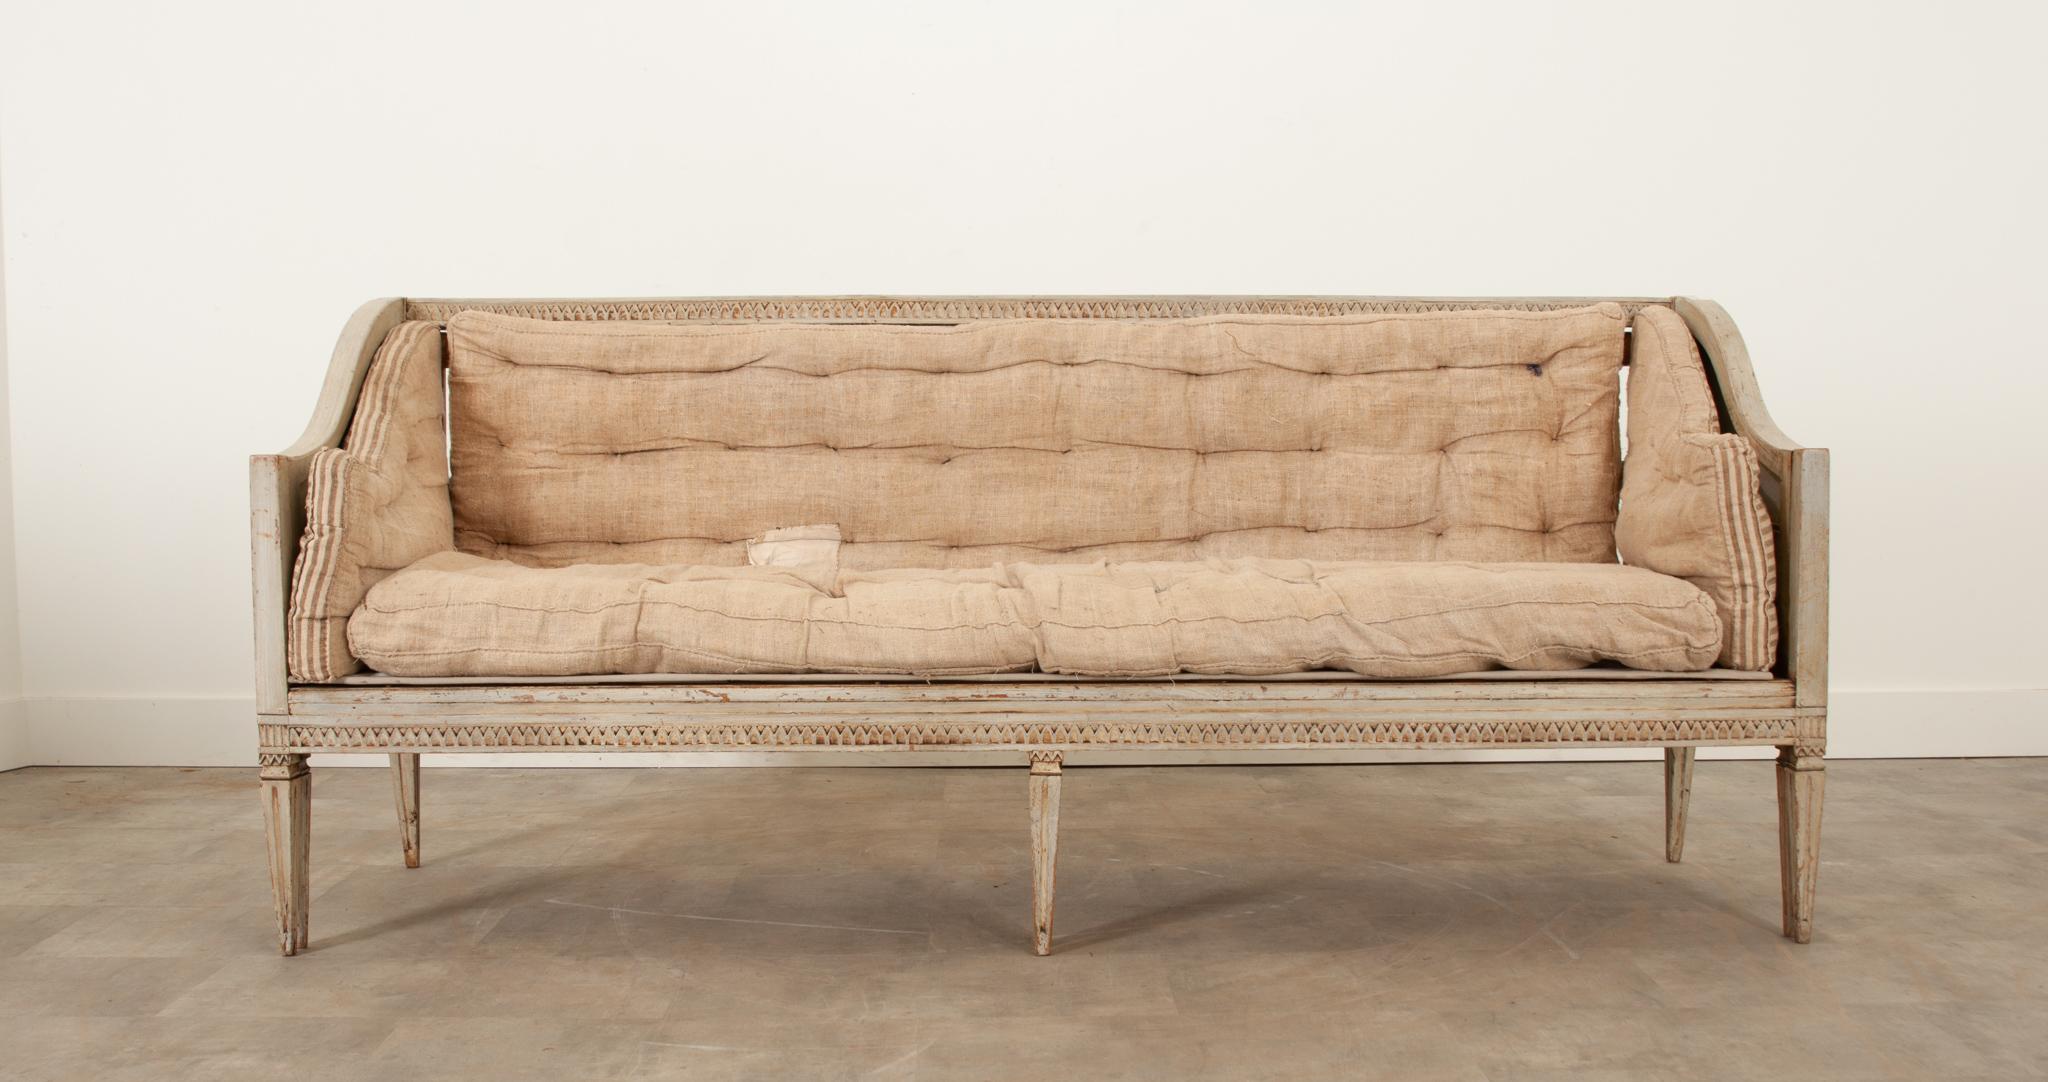 This handsome Swedish Gustavian settee or daybed is an amazing way to add more seating to any space. Its worn finish has a fantastic patina and is aged in all the right spots. Designed with function and simplicity in mind, the hand carved lambs